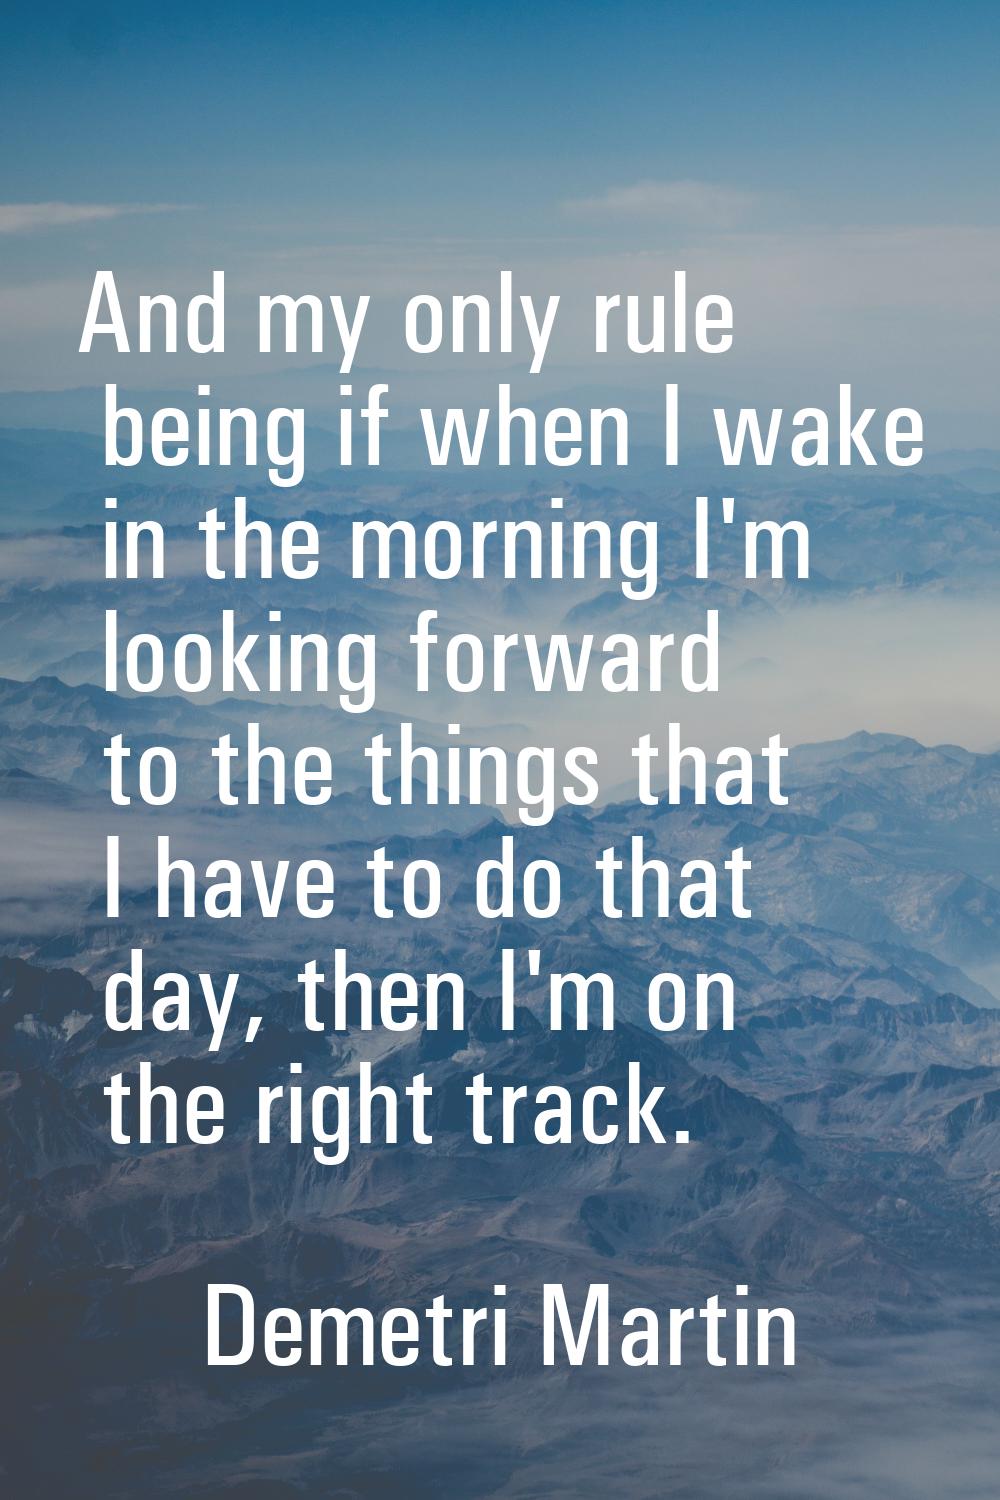 And my only rule being if when I wake in the morning I'm looking forward to the things that I have 